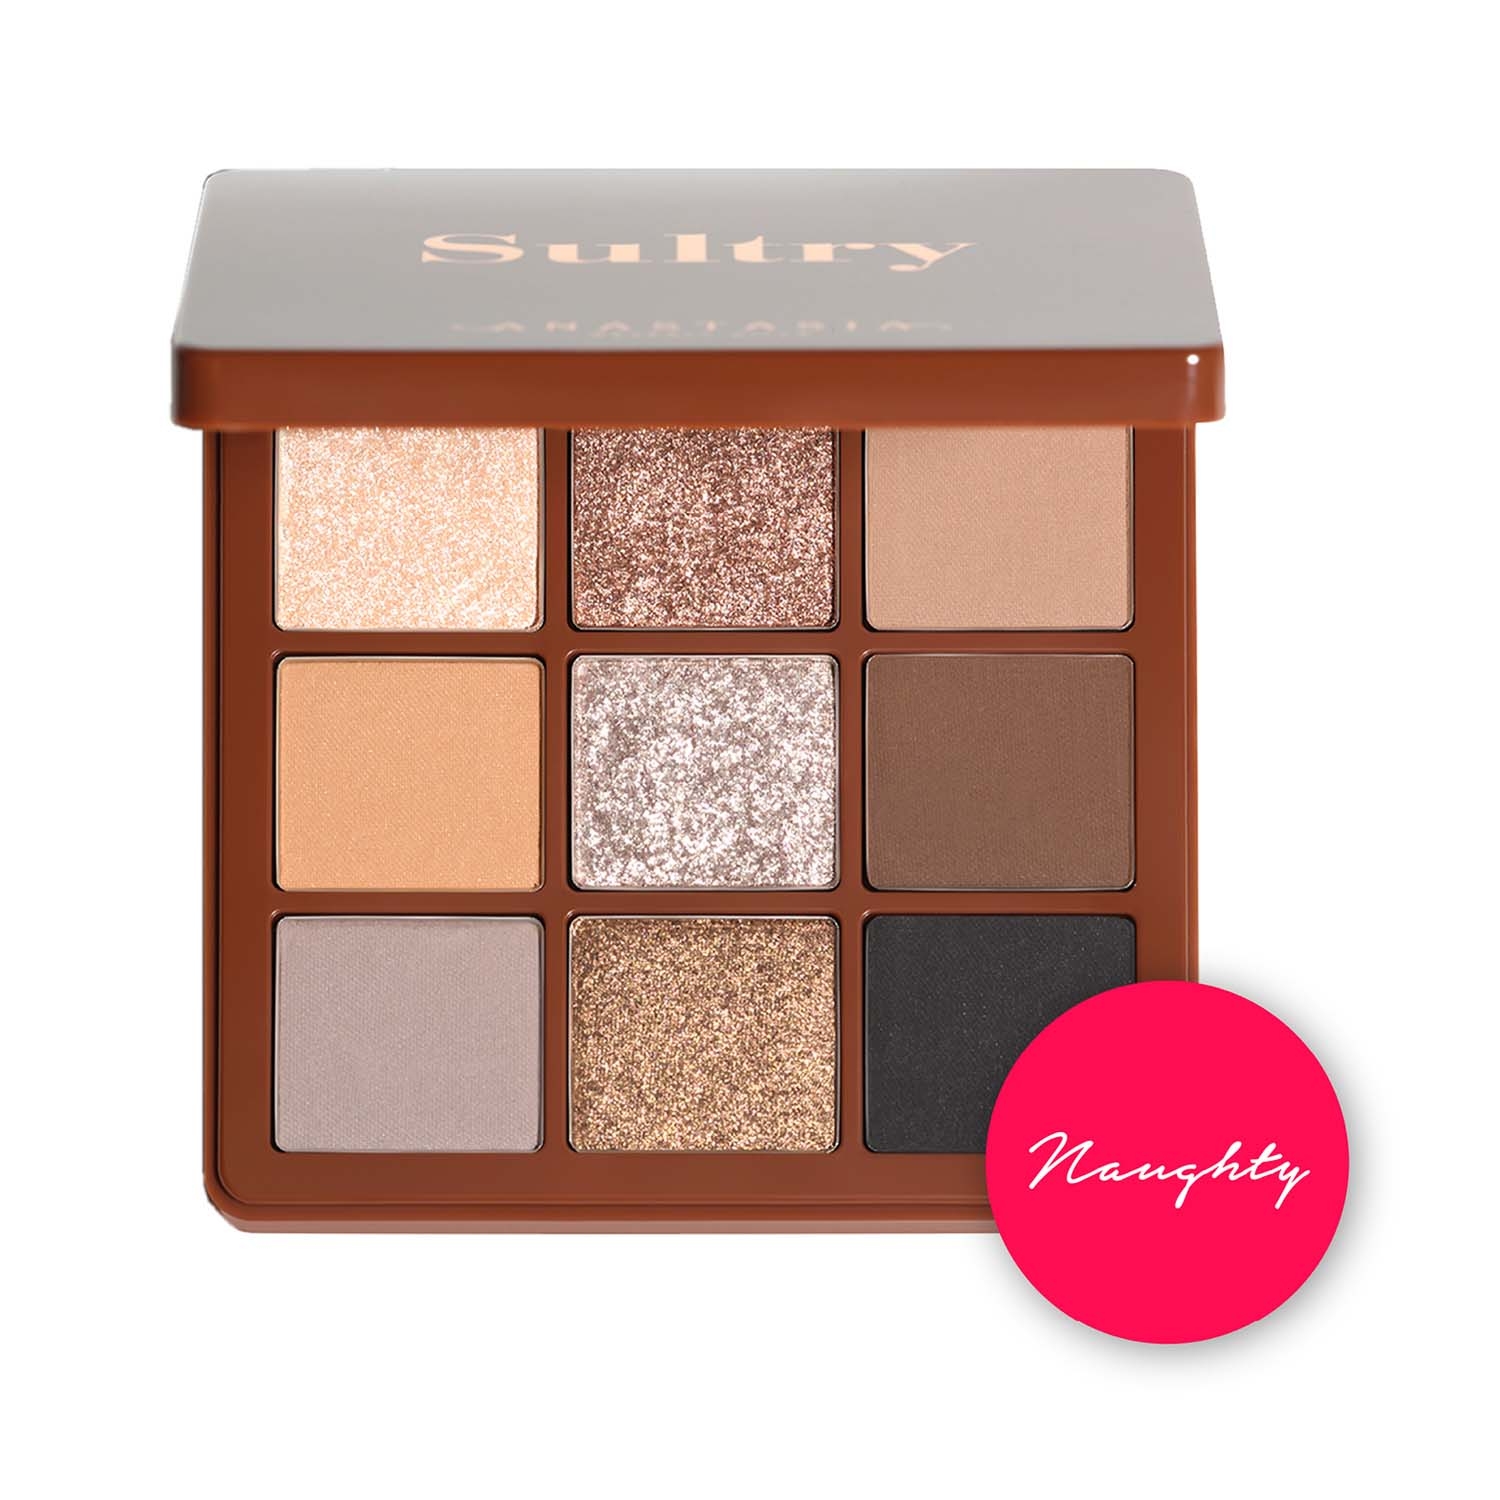 Anastasia Beverly Hills | Anastasia Beverly Hills Eyeshadow Palette Mini - Sultry (9g)